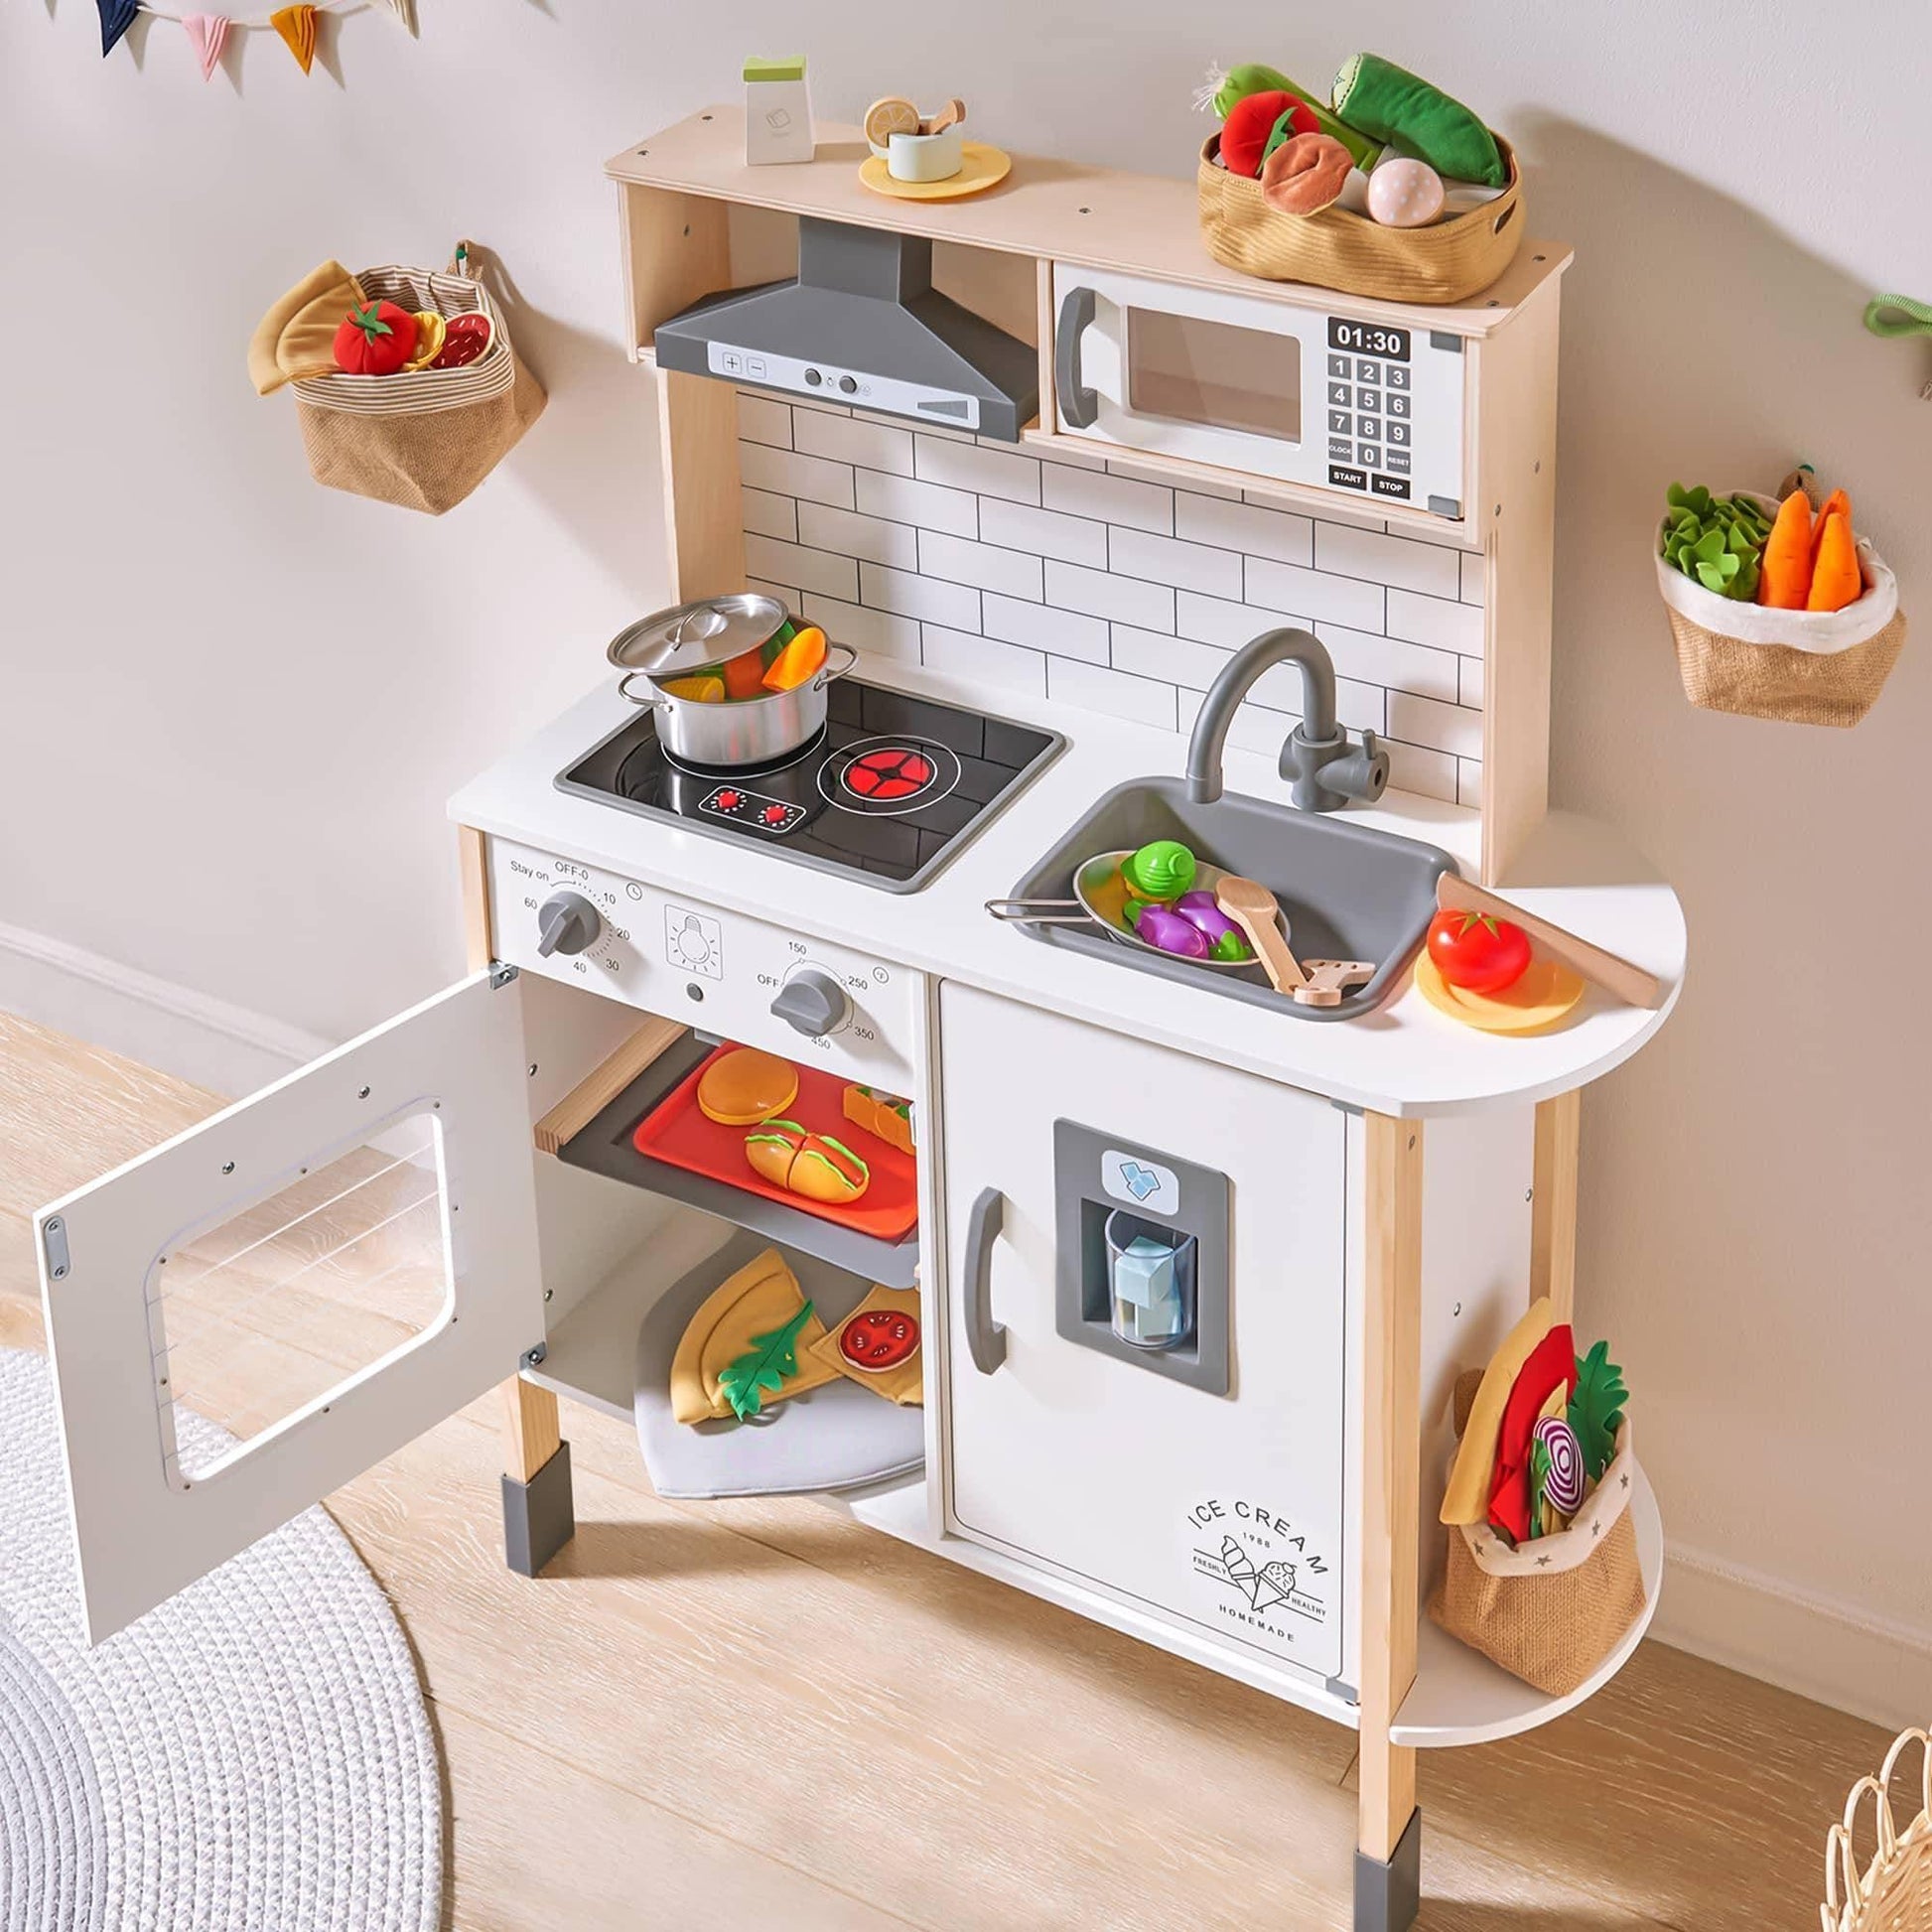 Tiny Land® Play Kitchen With 18 Pcs Toy Food Cookware, 45% OFF